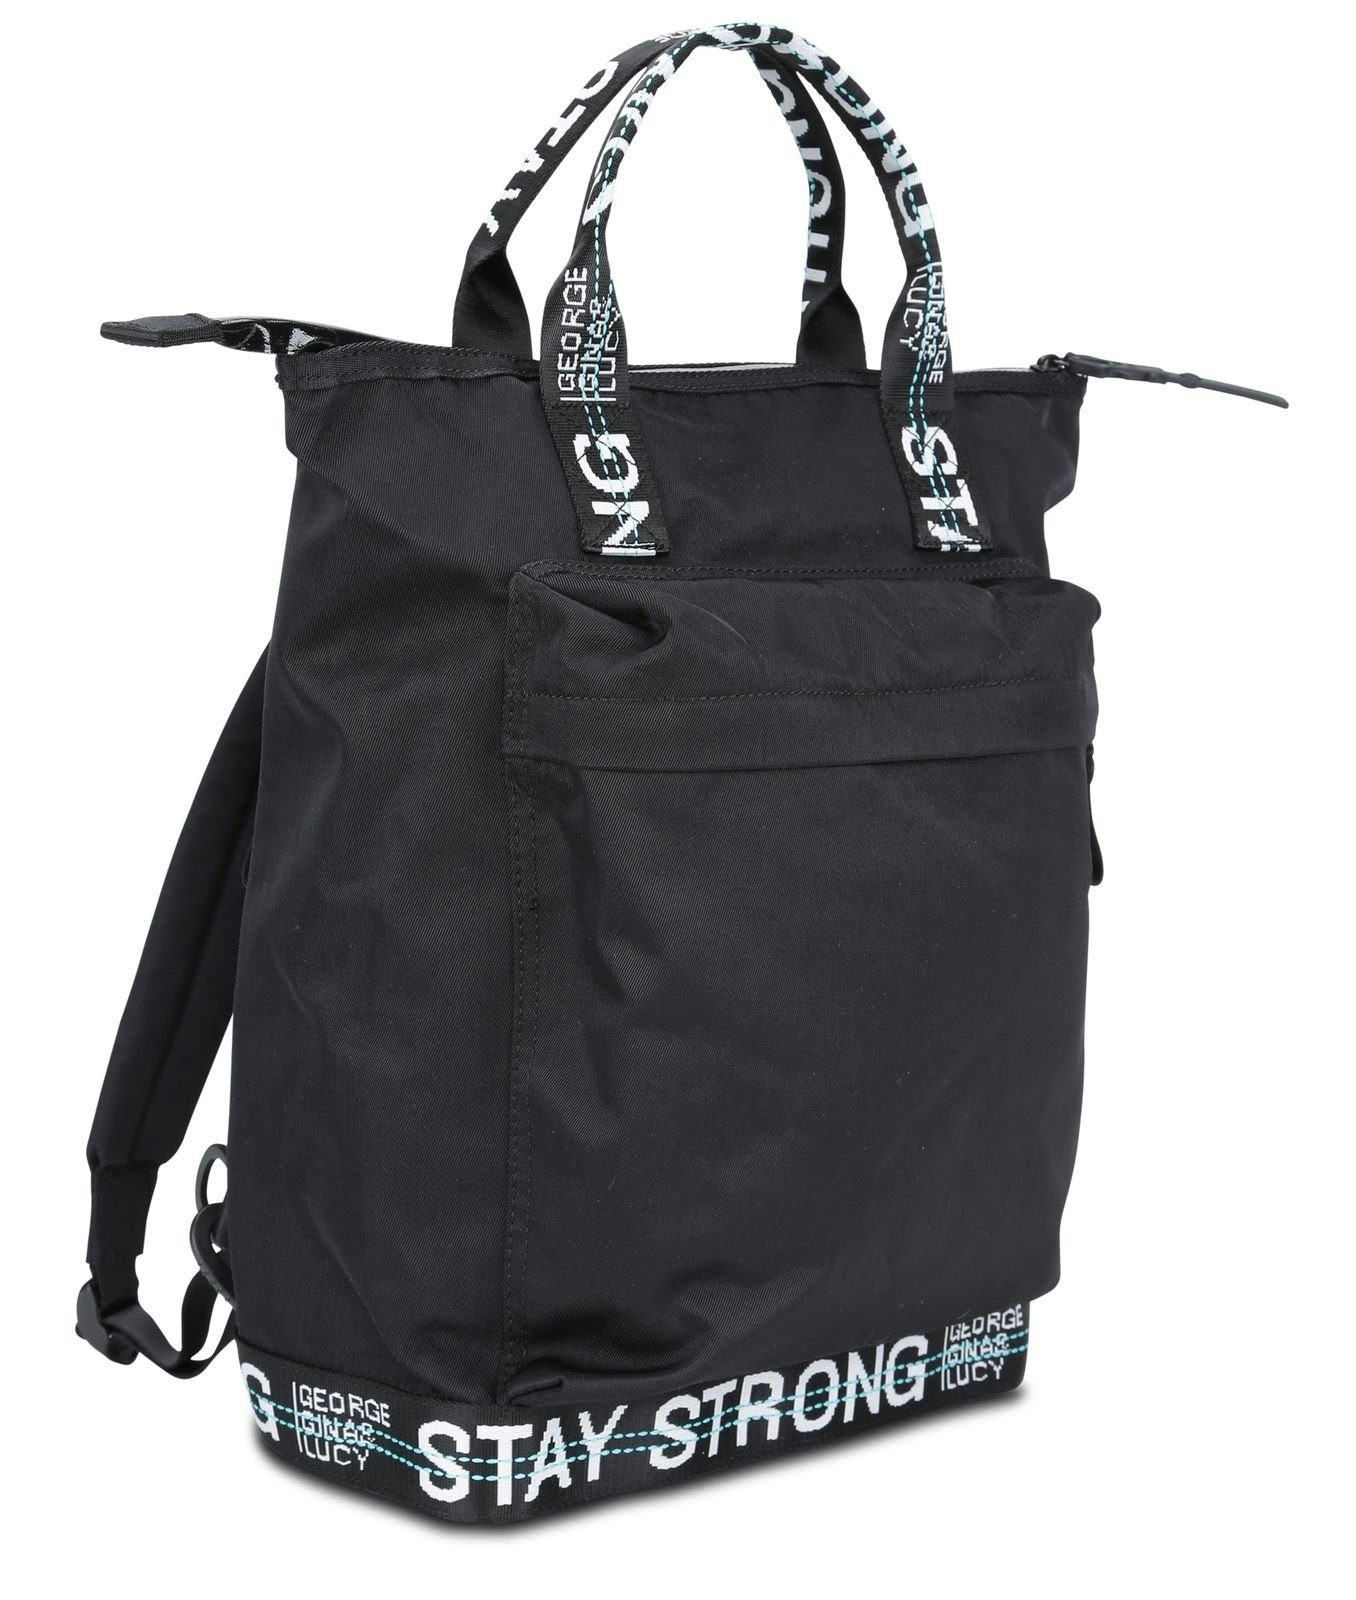 Rucksack George Roots Gina Lucy Strong Black & Nylon